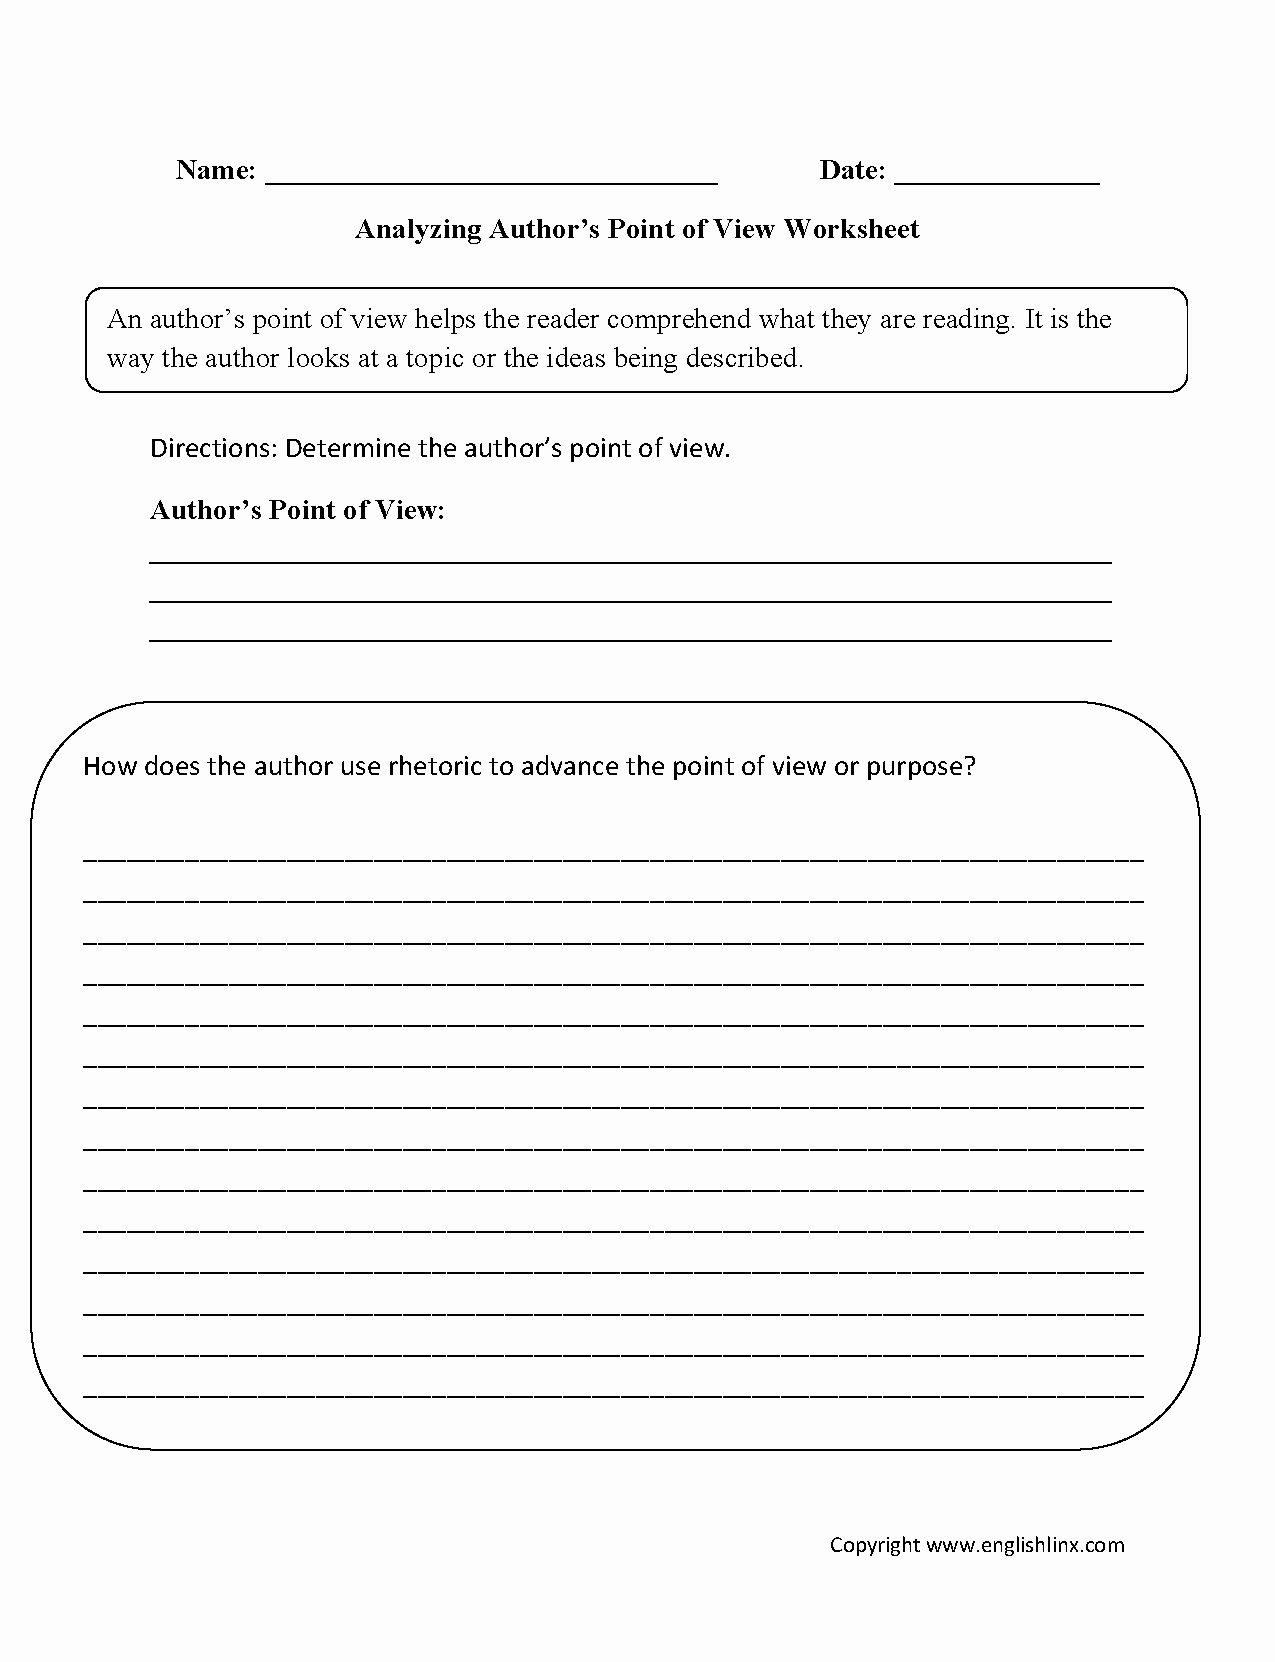 Point Of View Worksheet Unique Analyzing Author S Point Of View Worksheets